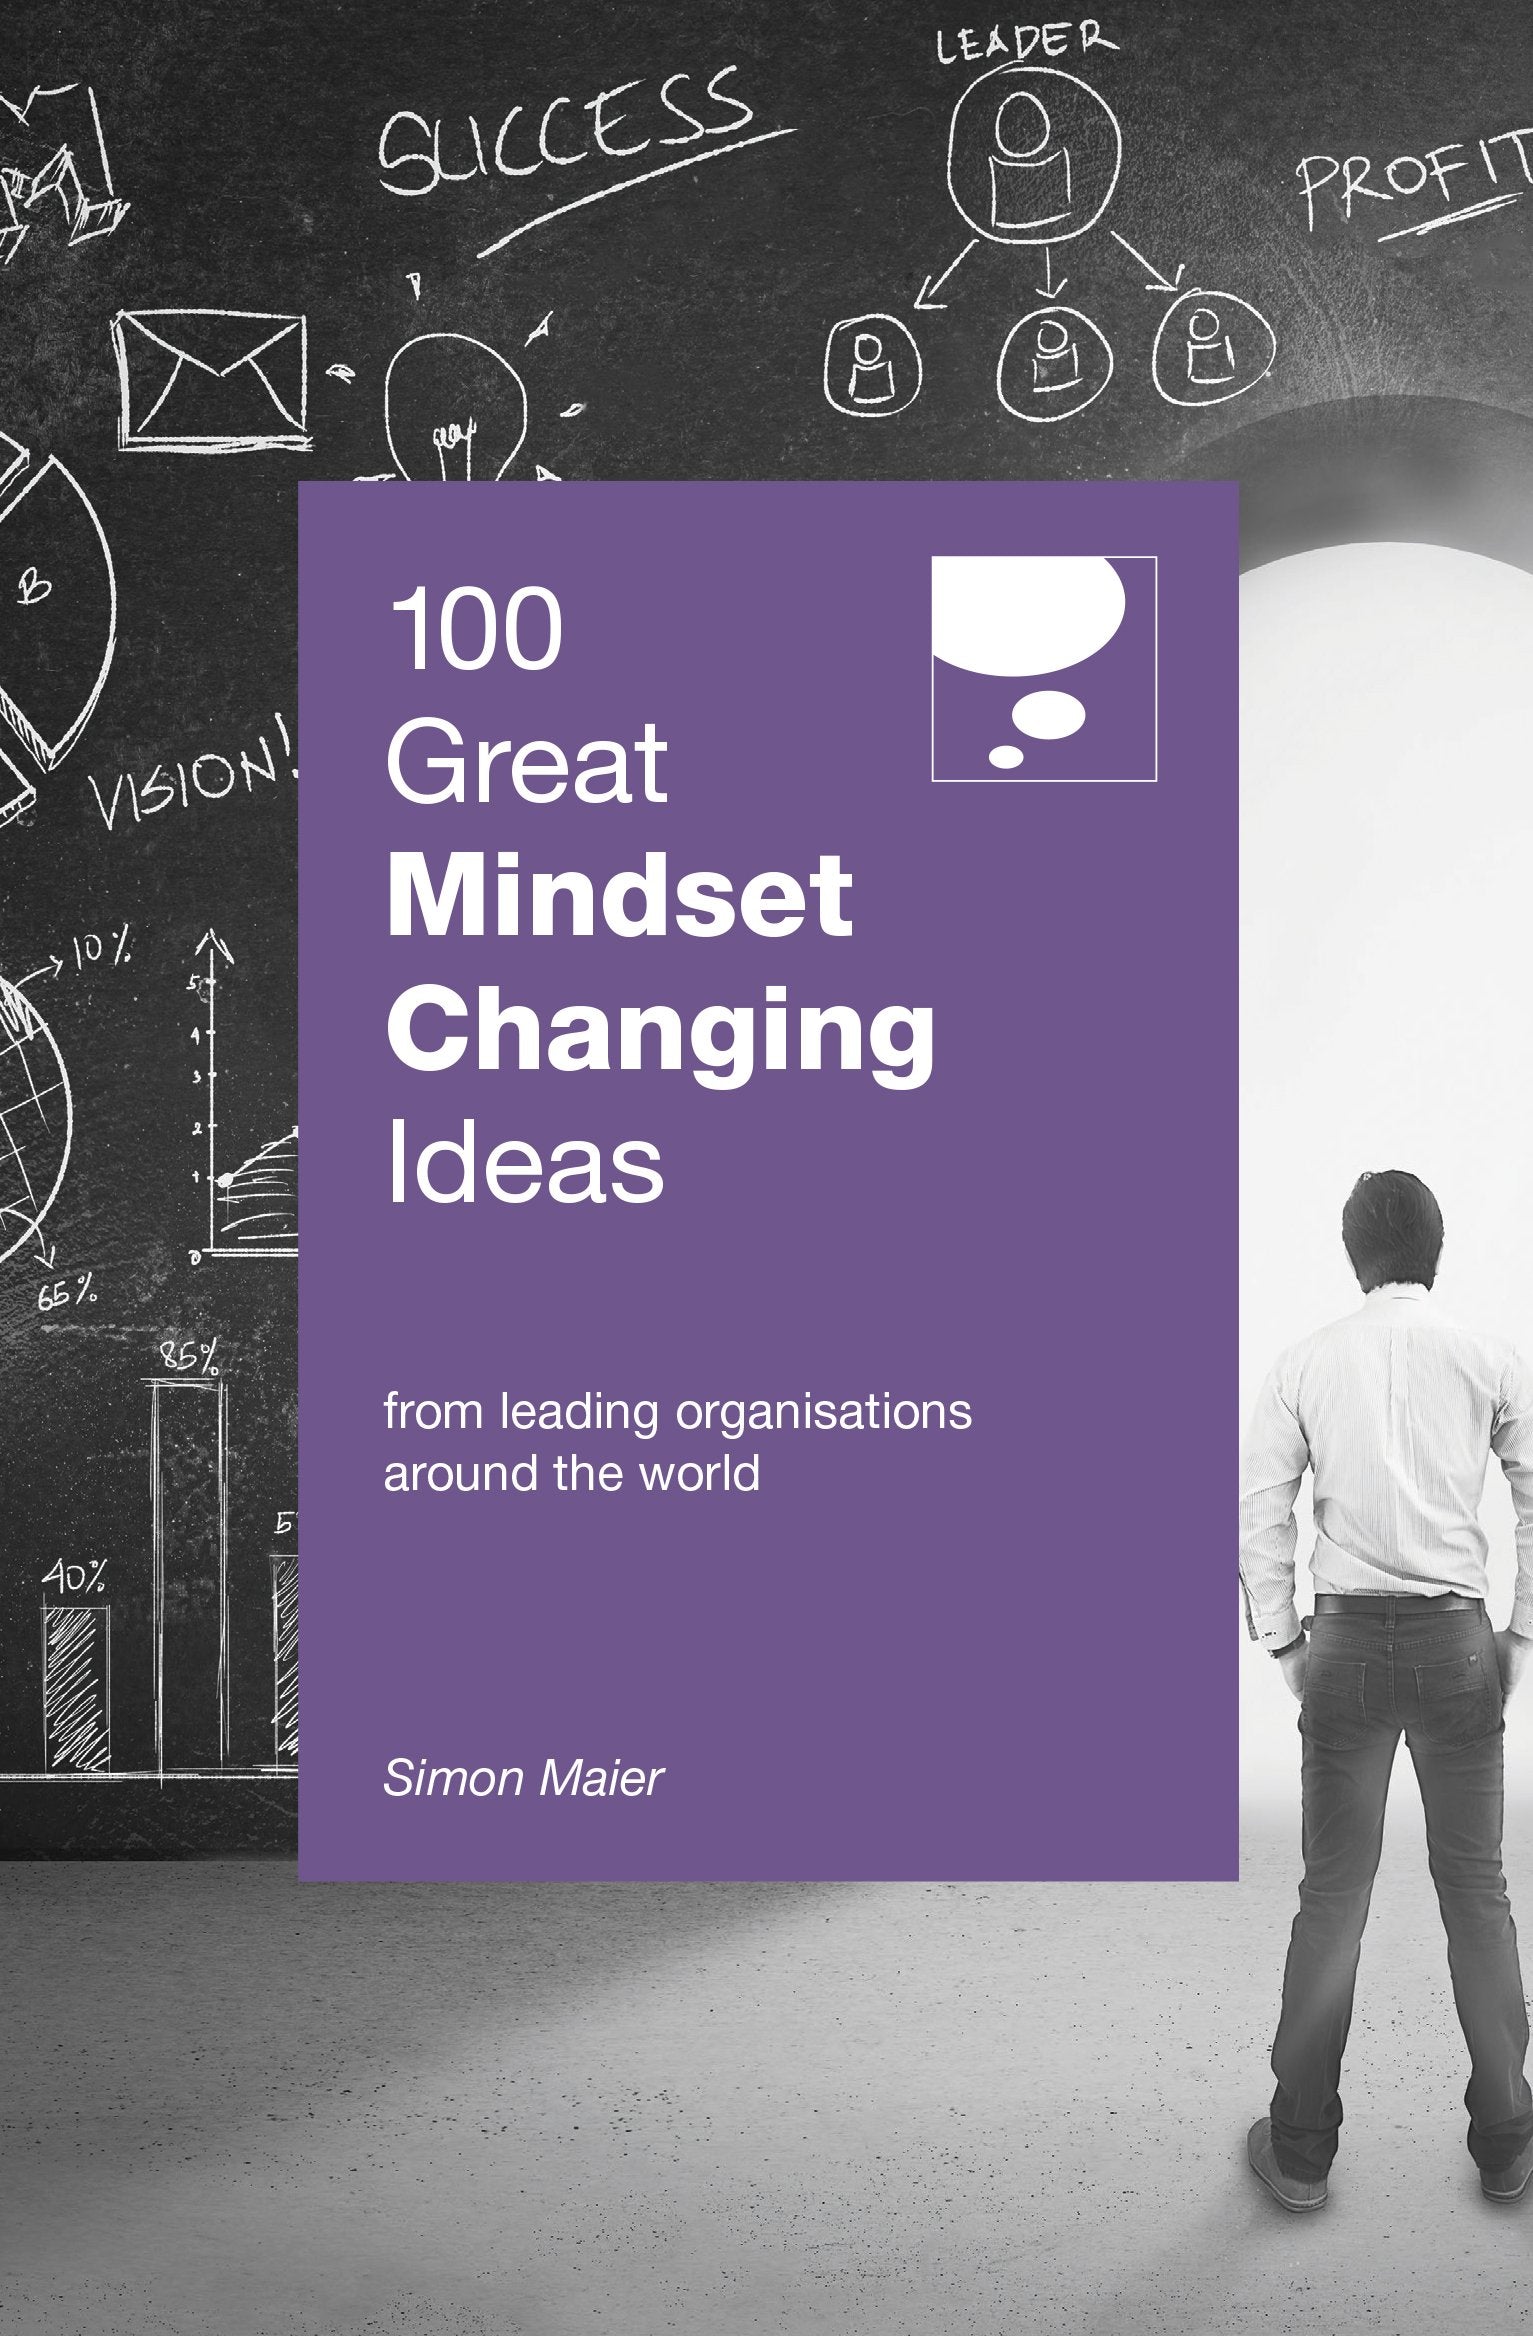 100 Great Mindset Changing Ideas